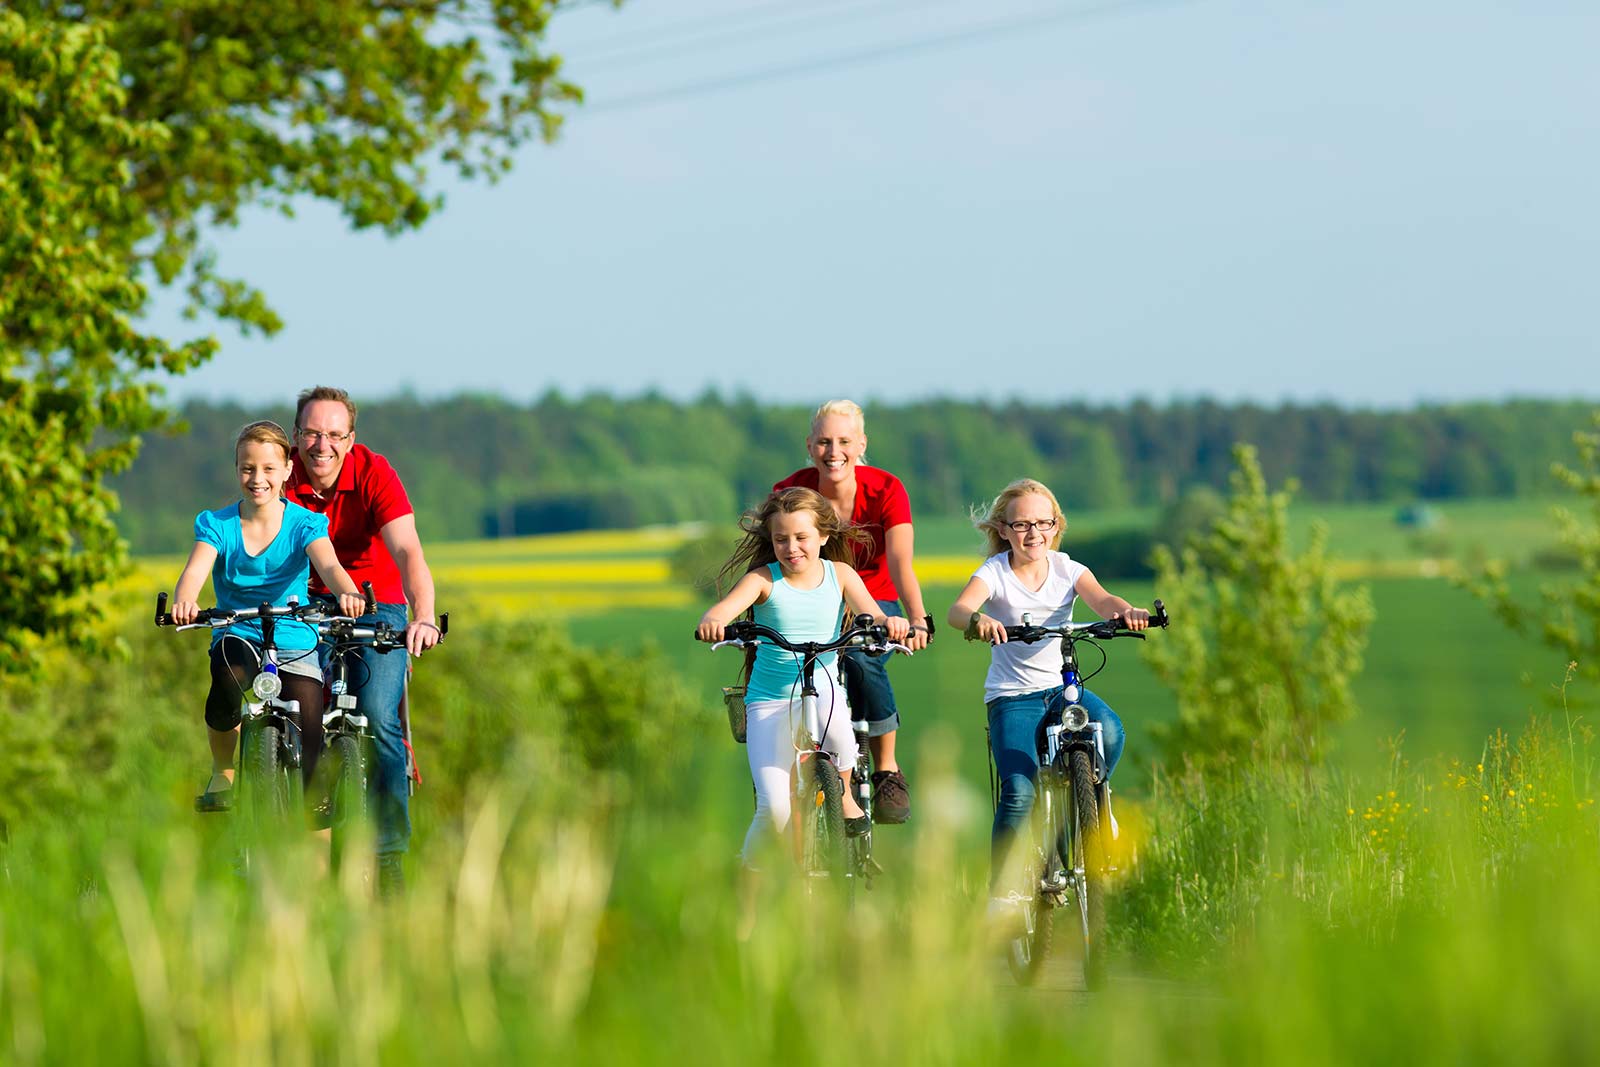 Family of campers on bikes in the countryside in Saint-Hilaire-de-Riez